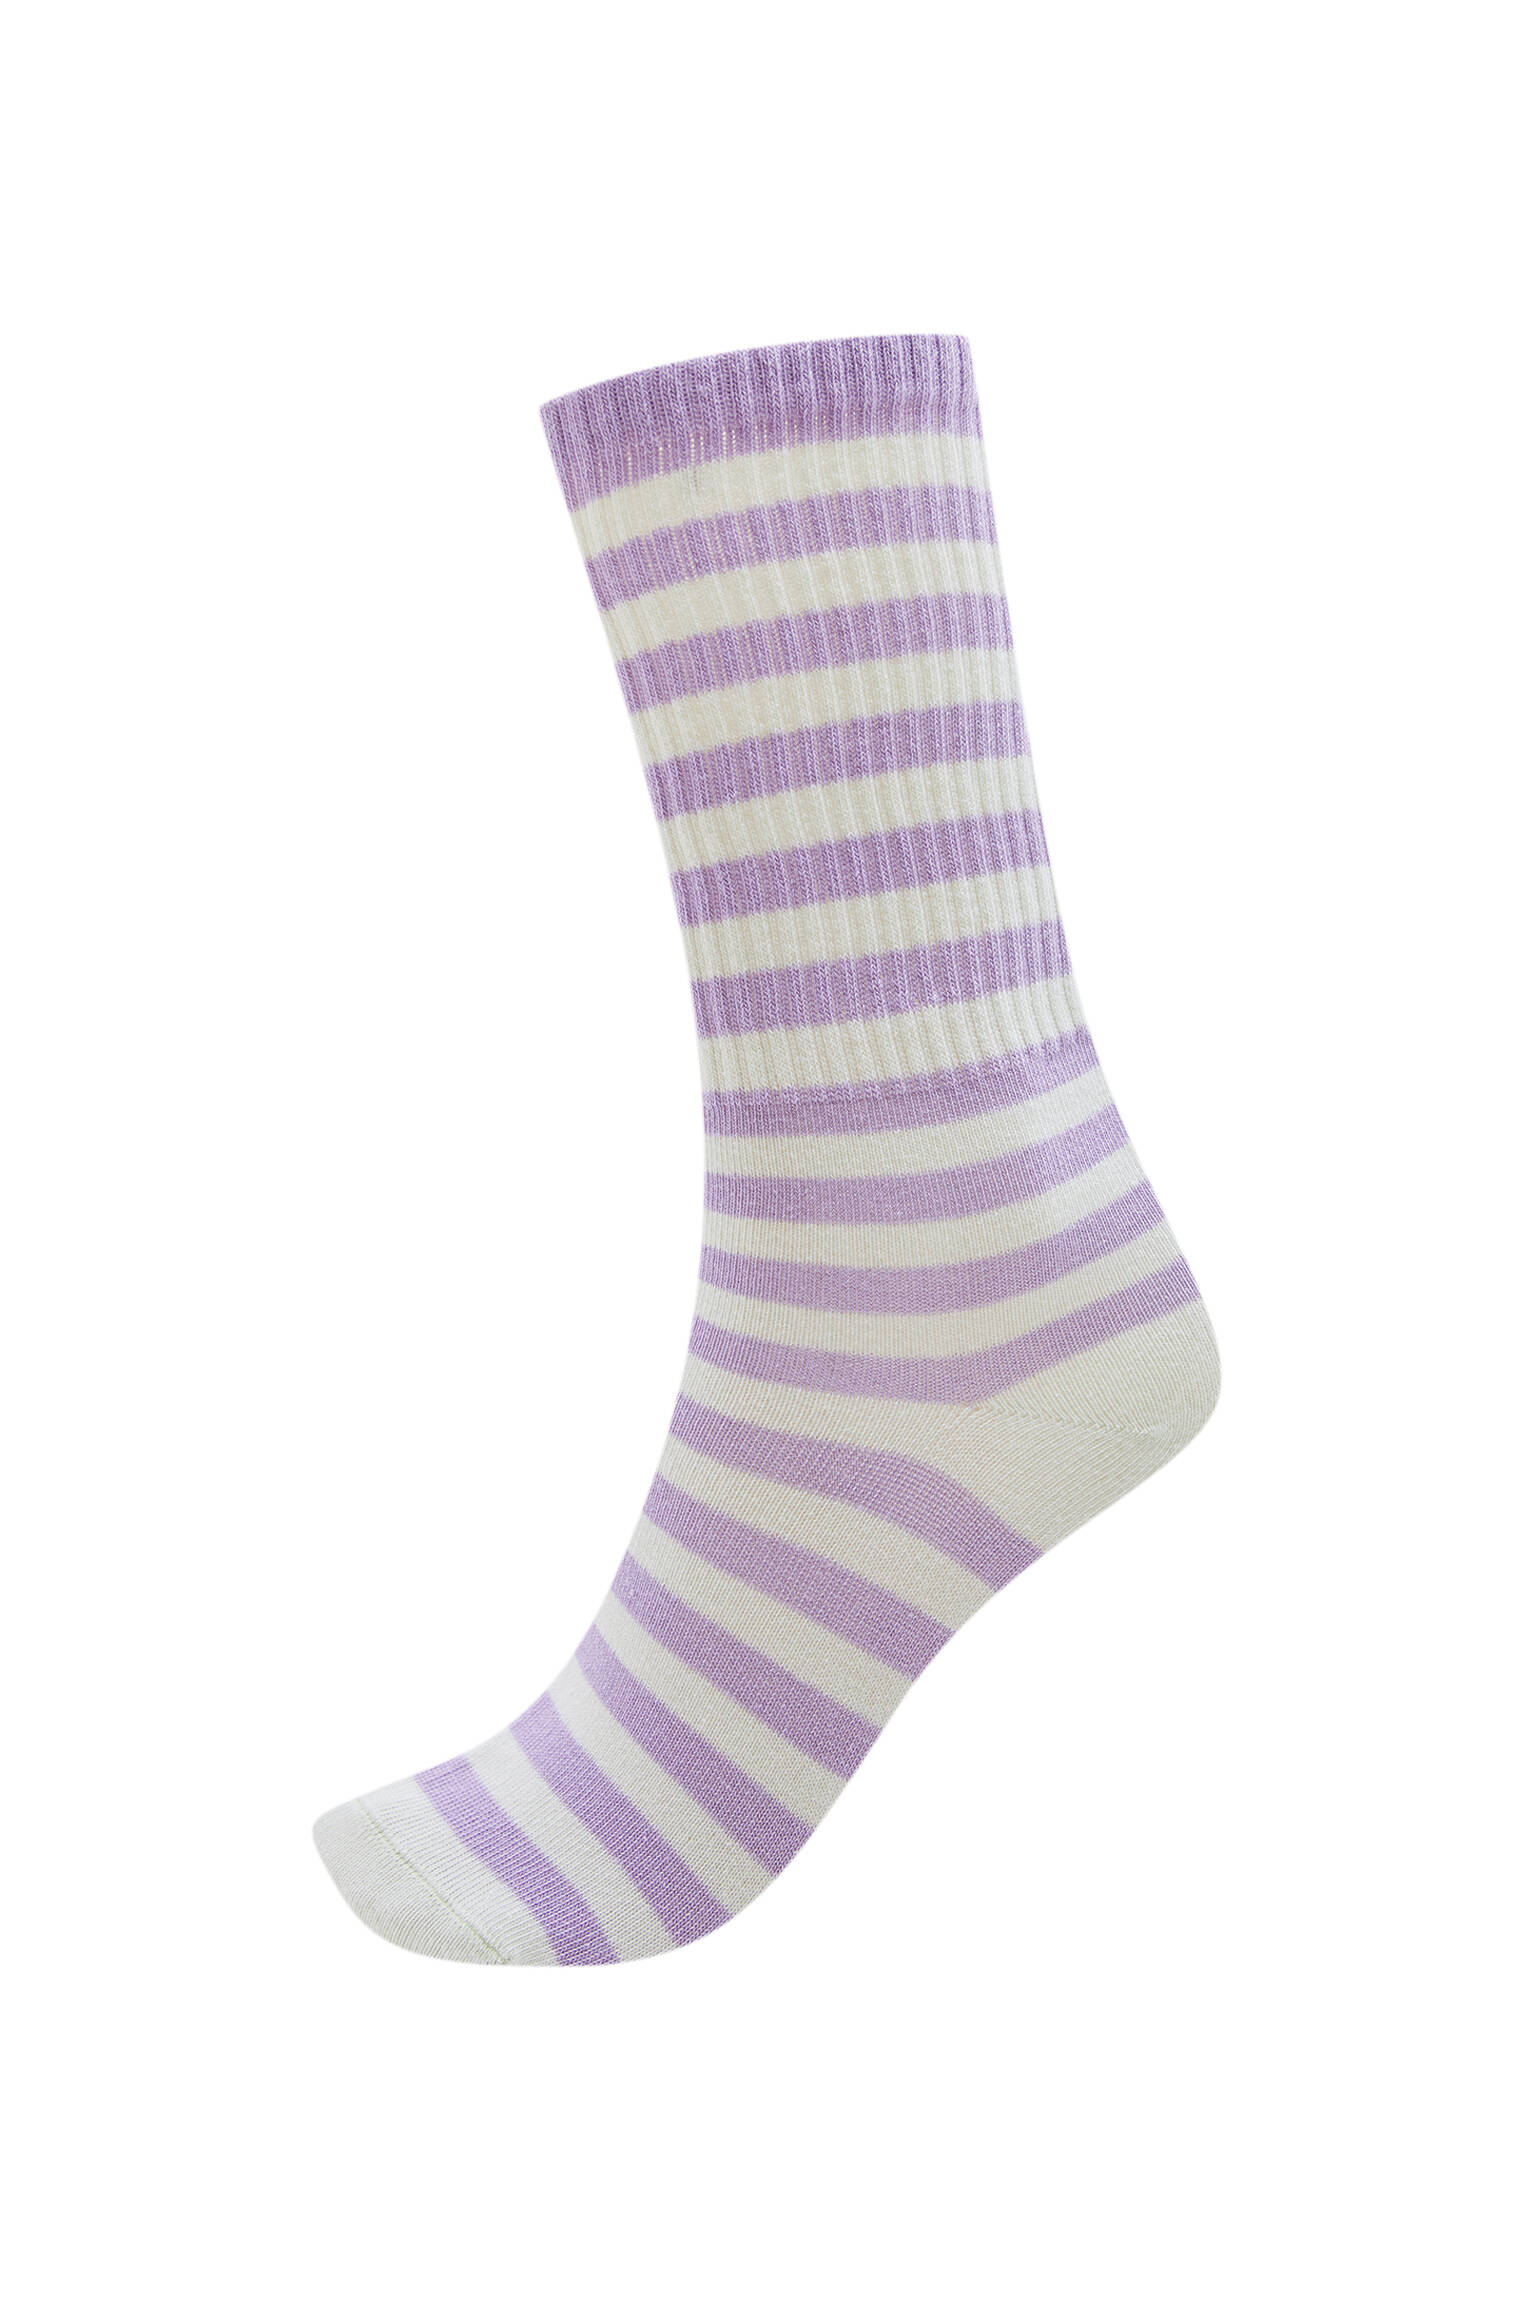 Pull&bear Femme Chaussettes Montantes à Rayures All Over. Lilas M